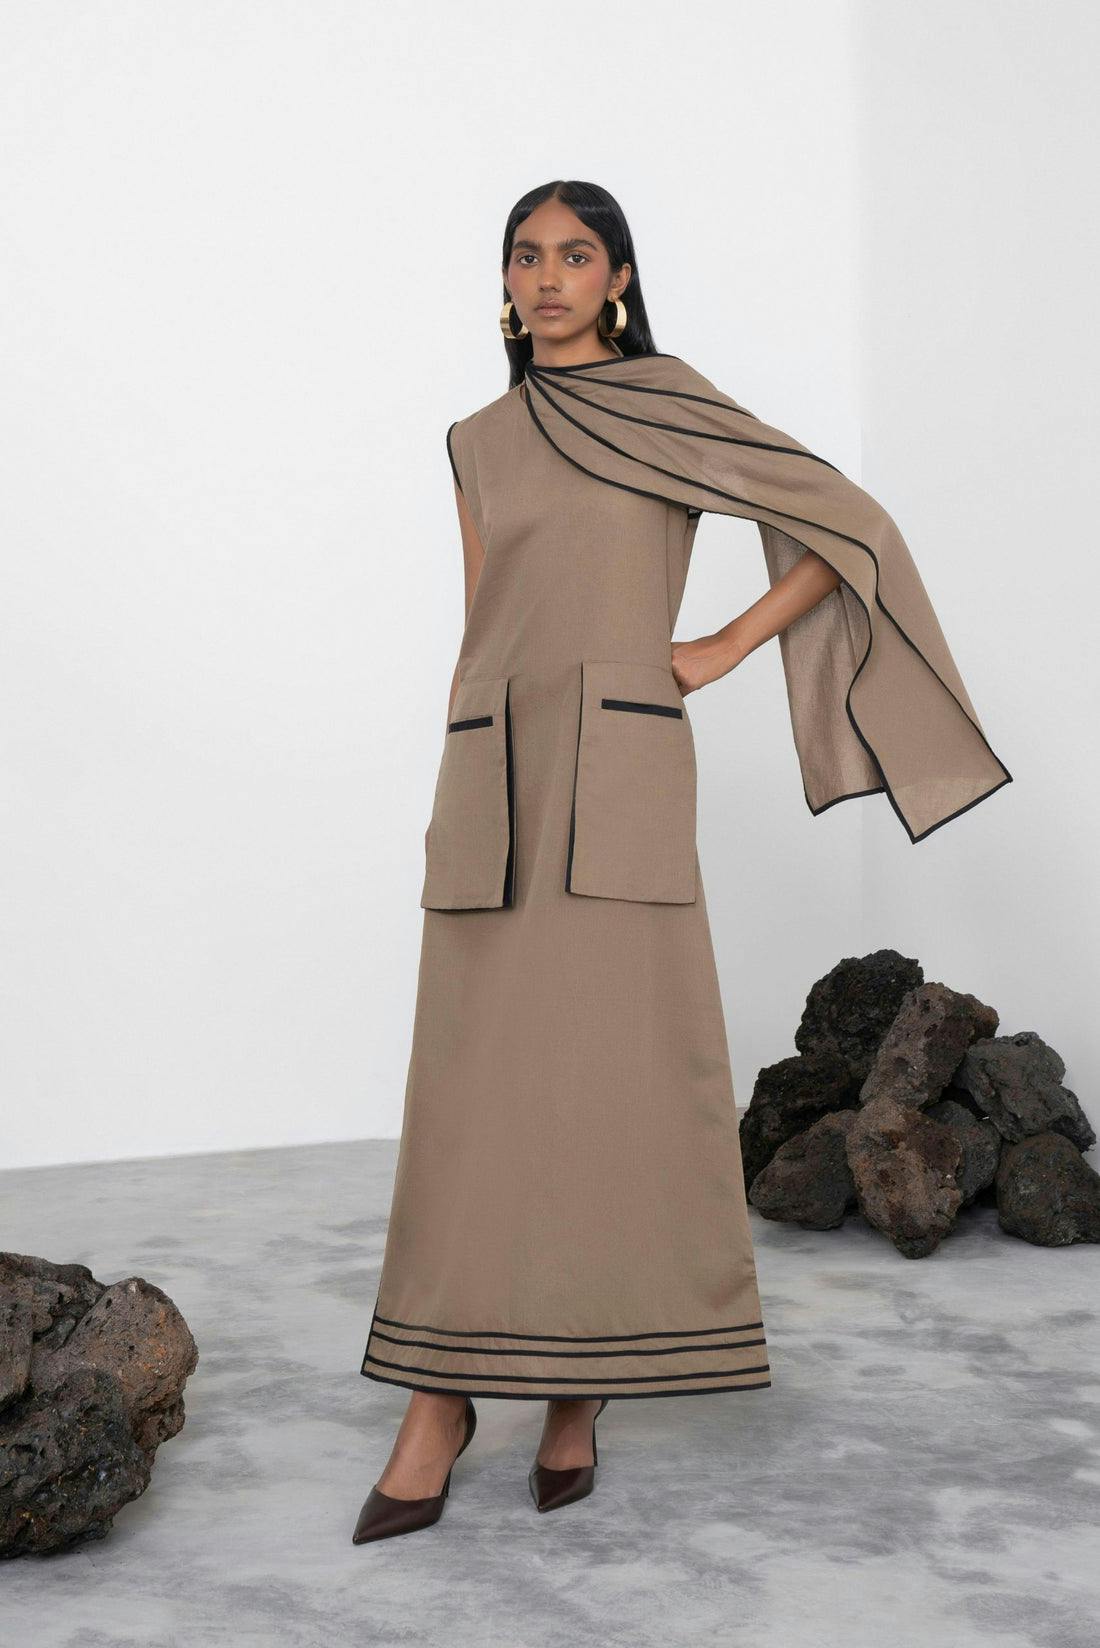 Scarf Collared Detail Dress, a product by Corpora Studio